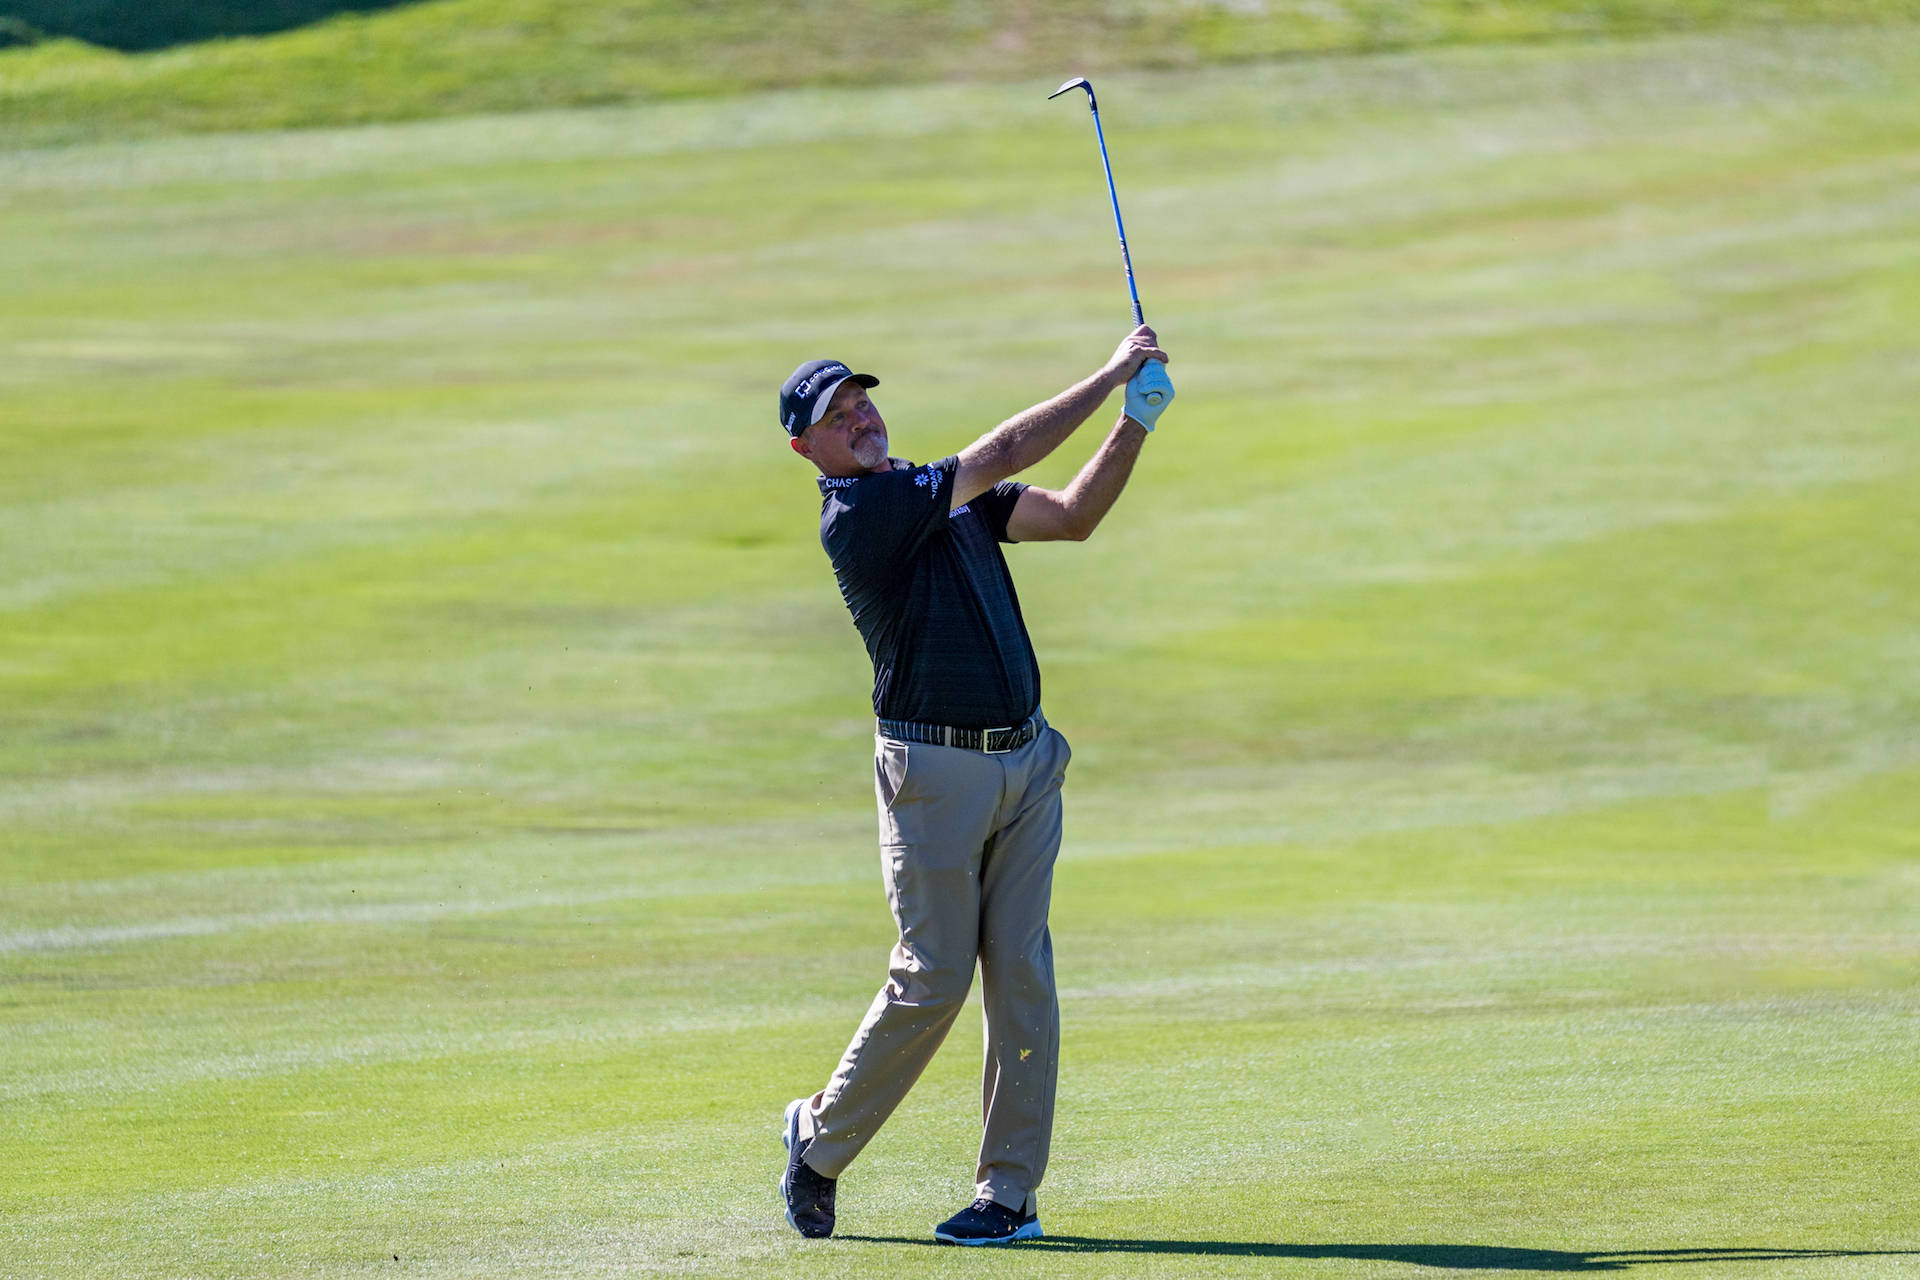 PGA TOUR Champions season earnings leader Jerry Kelly (pictured) is returning to defend his Boeing Classic championship on Aug. 24-26 at The Club at Snoqualmie Ridge. Kelly will be joined by the next five players on the current Charles Schwab Money List, including Miguel Angel Jiménez, David Toms and Paul Broadhurst. Other commitments currently among the Charles Schwab Money List top 10 are Bernhard Langer, Scott McCarron, Tim Petrovic and Joe Durant. Langer won the 2010 and 2016 Boeing Classic. In addition to Kelly and Langer, other past winners to make commitments for this tournament are Tom Kite (2008), Loren Roberts (2009), Mark Calcavecchia (2011), Scott Dunlap (2014) and Billy Andrade (2015). For Boeing Classic tickets and more information, visit BoeingClassic.com. Courtesy of Mike Centioli/Boeing Classic